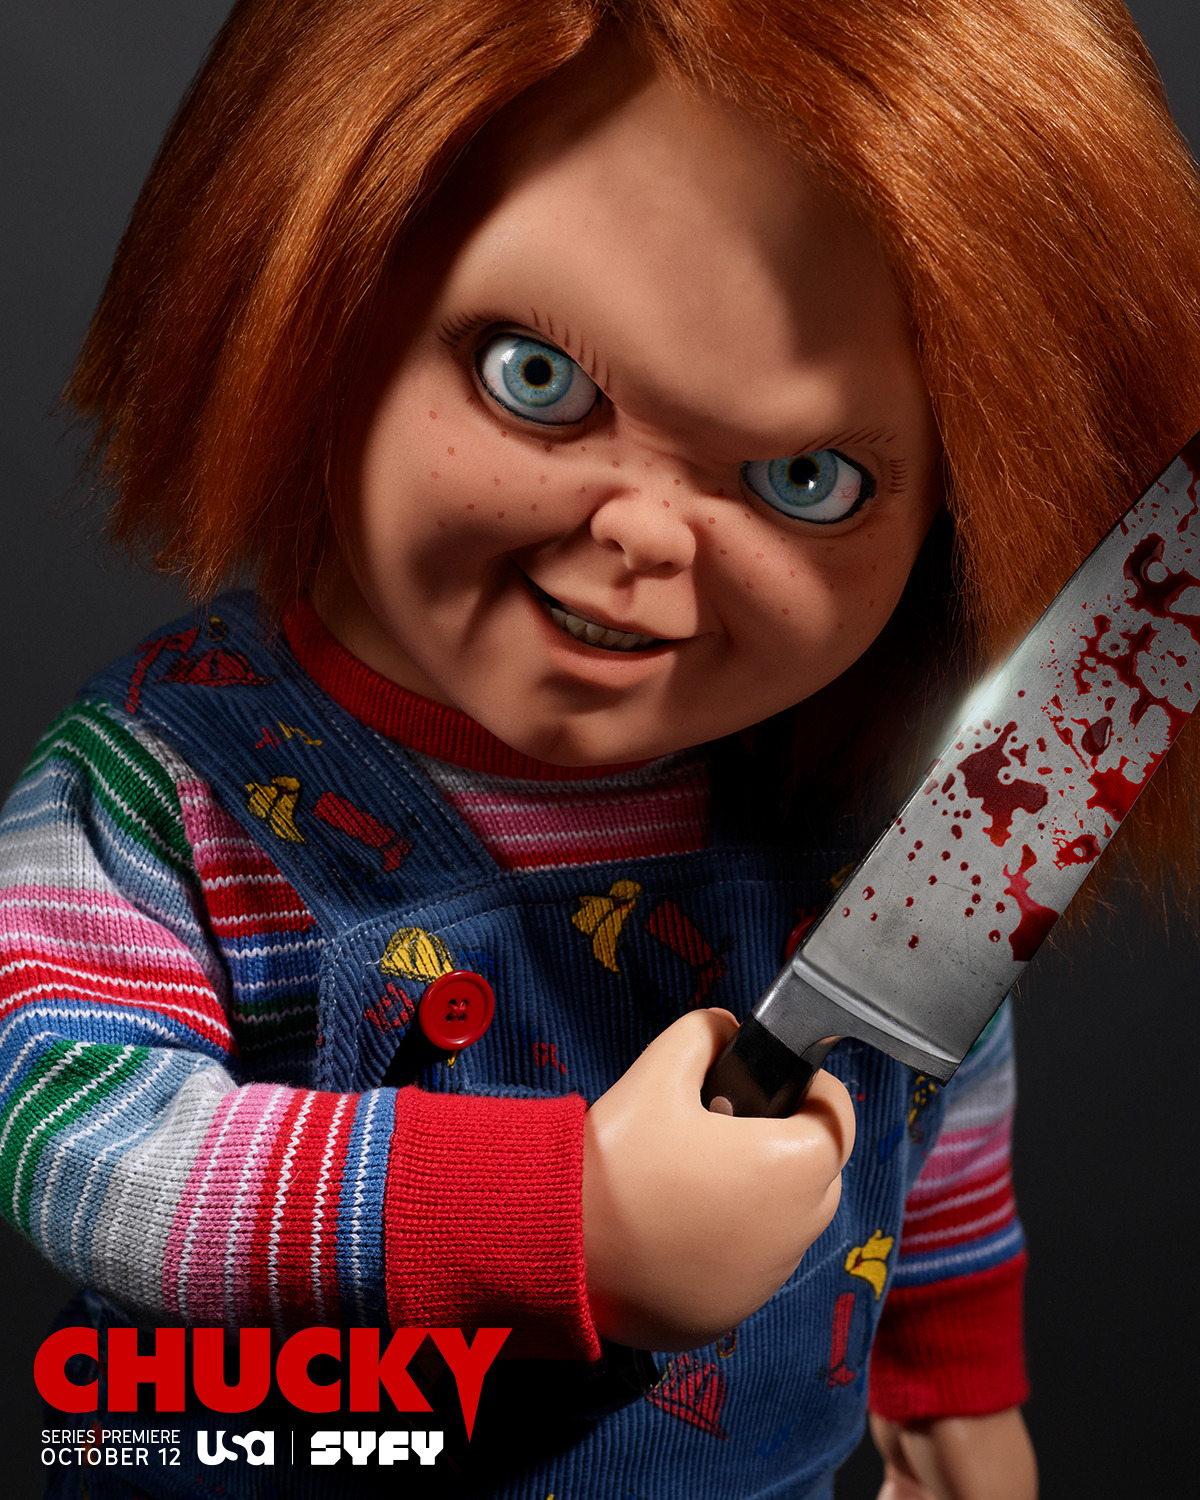 Extra Large TV Poster Image for Chucky (#1 of 9)